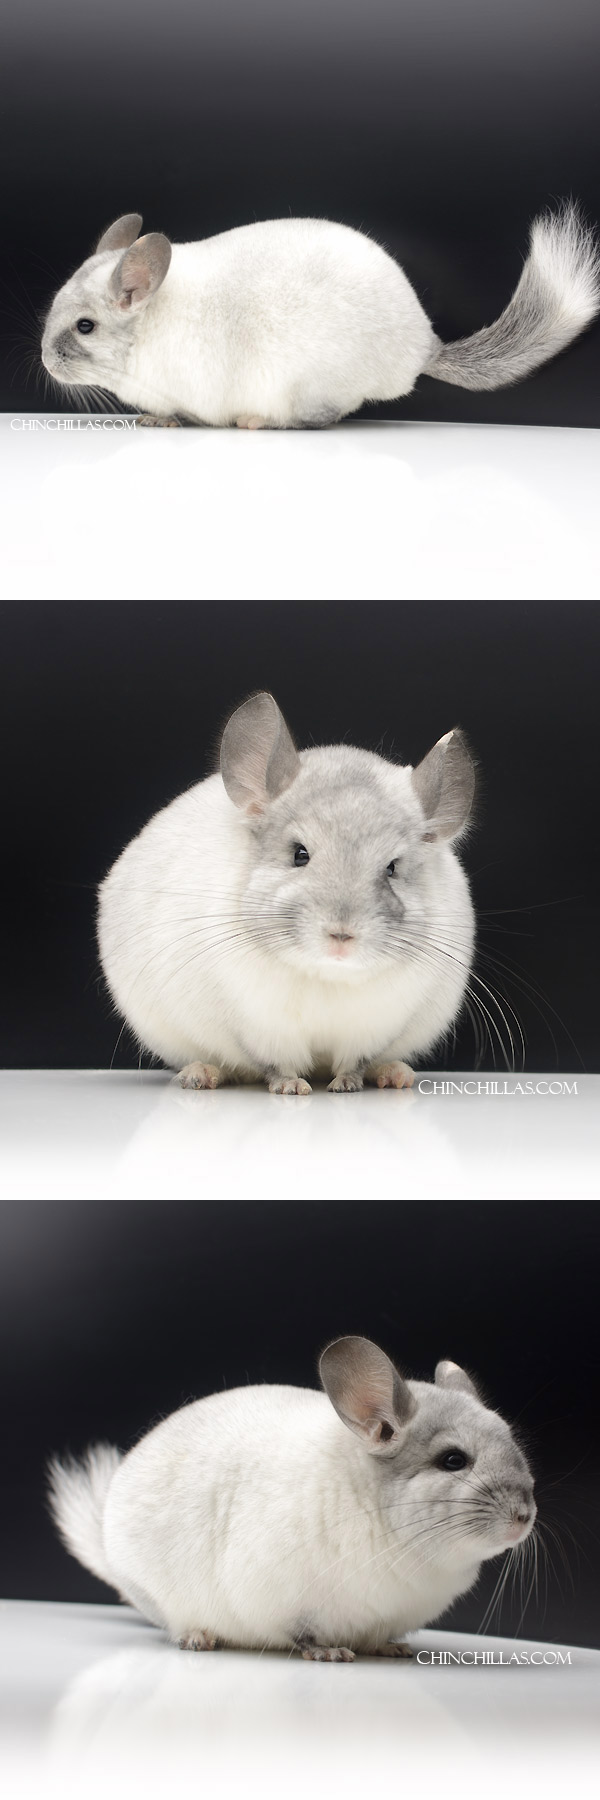 Chinchilla or related item offered for sale or export on Chinchillas.com - 23108 White Mosaic Male Chinchilla with Teardrop Marking